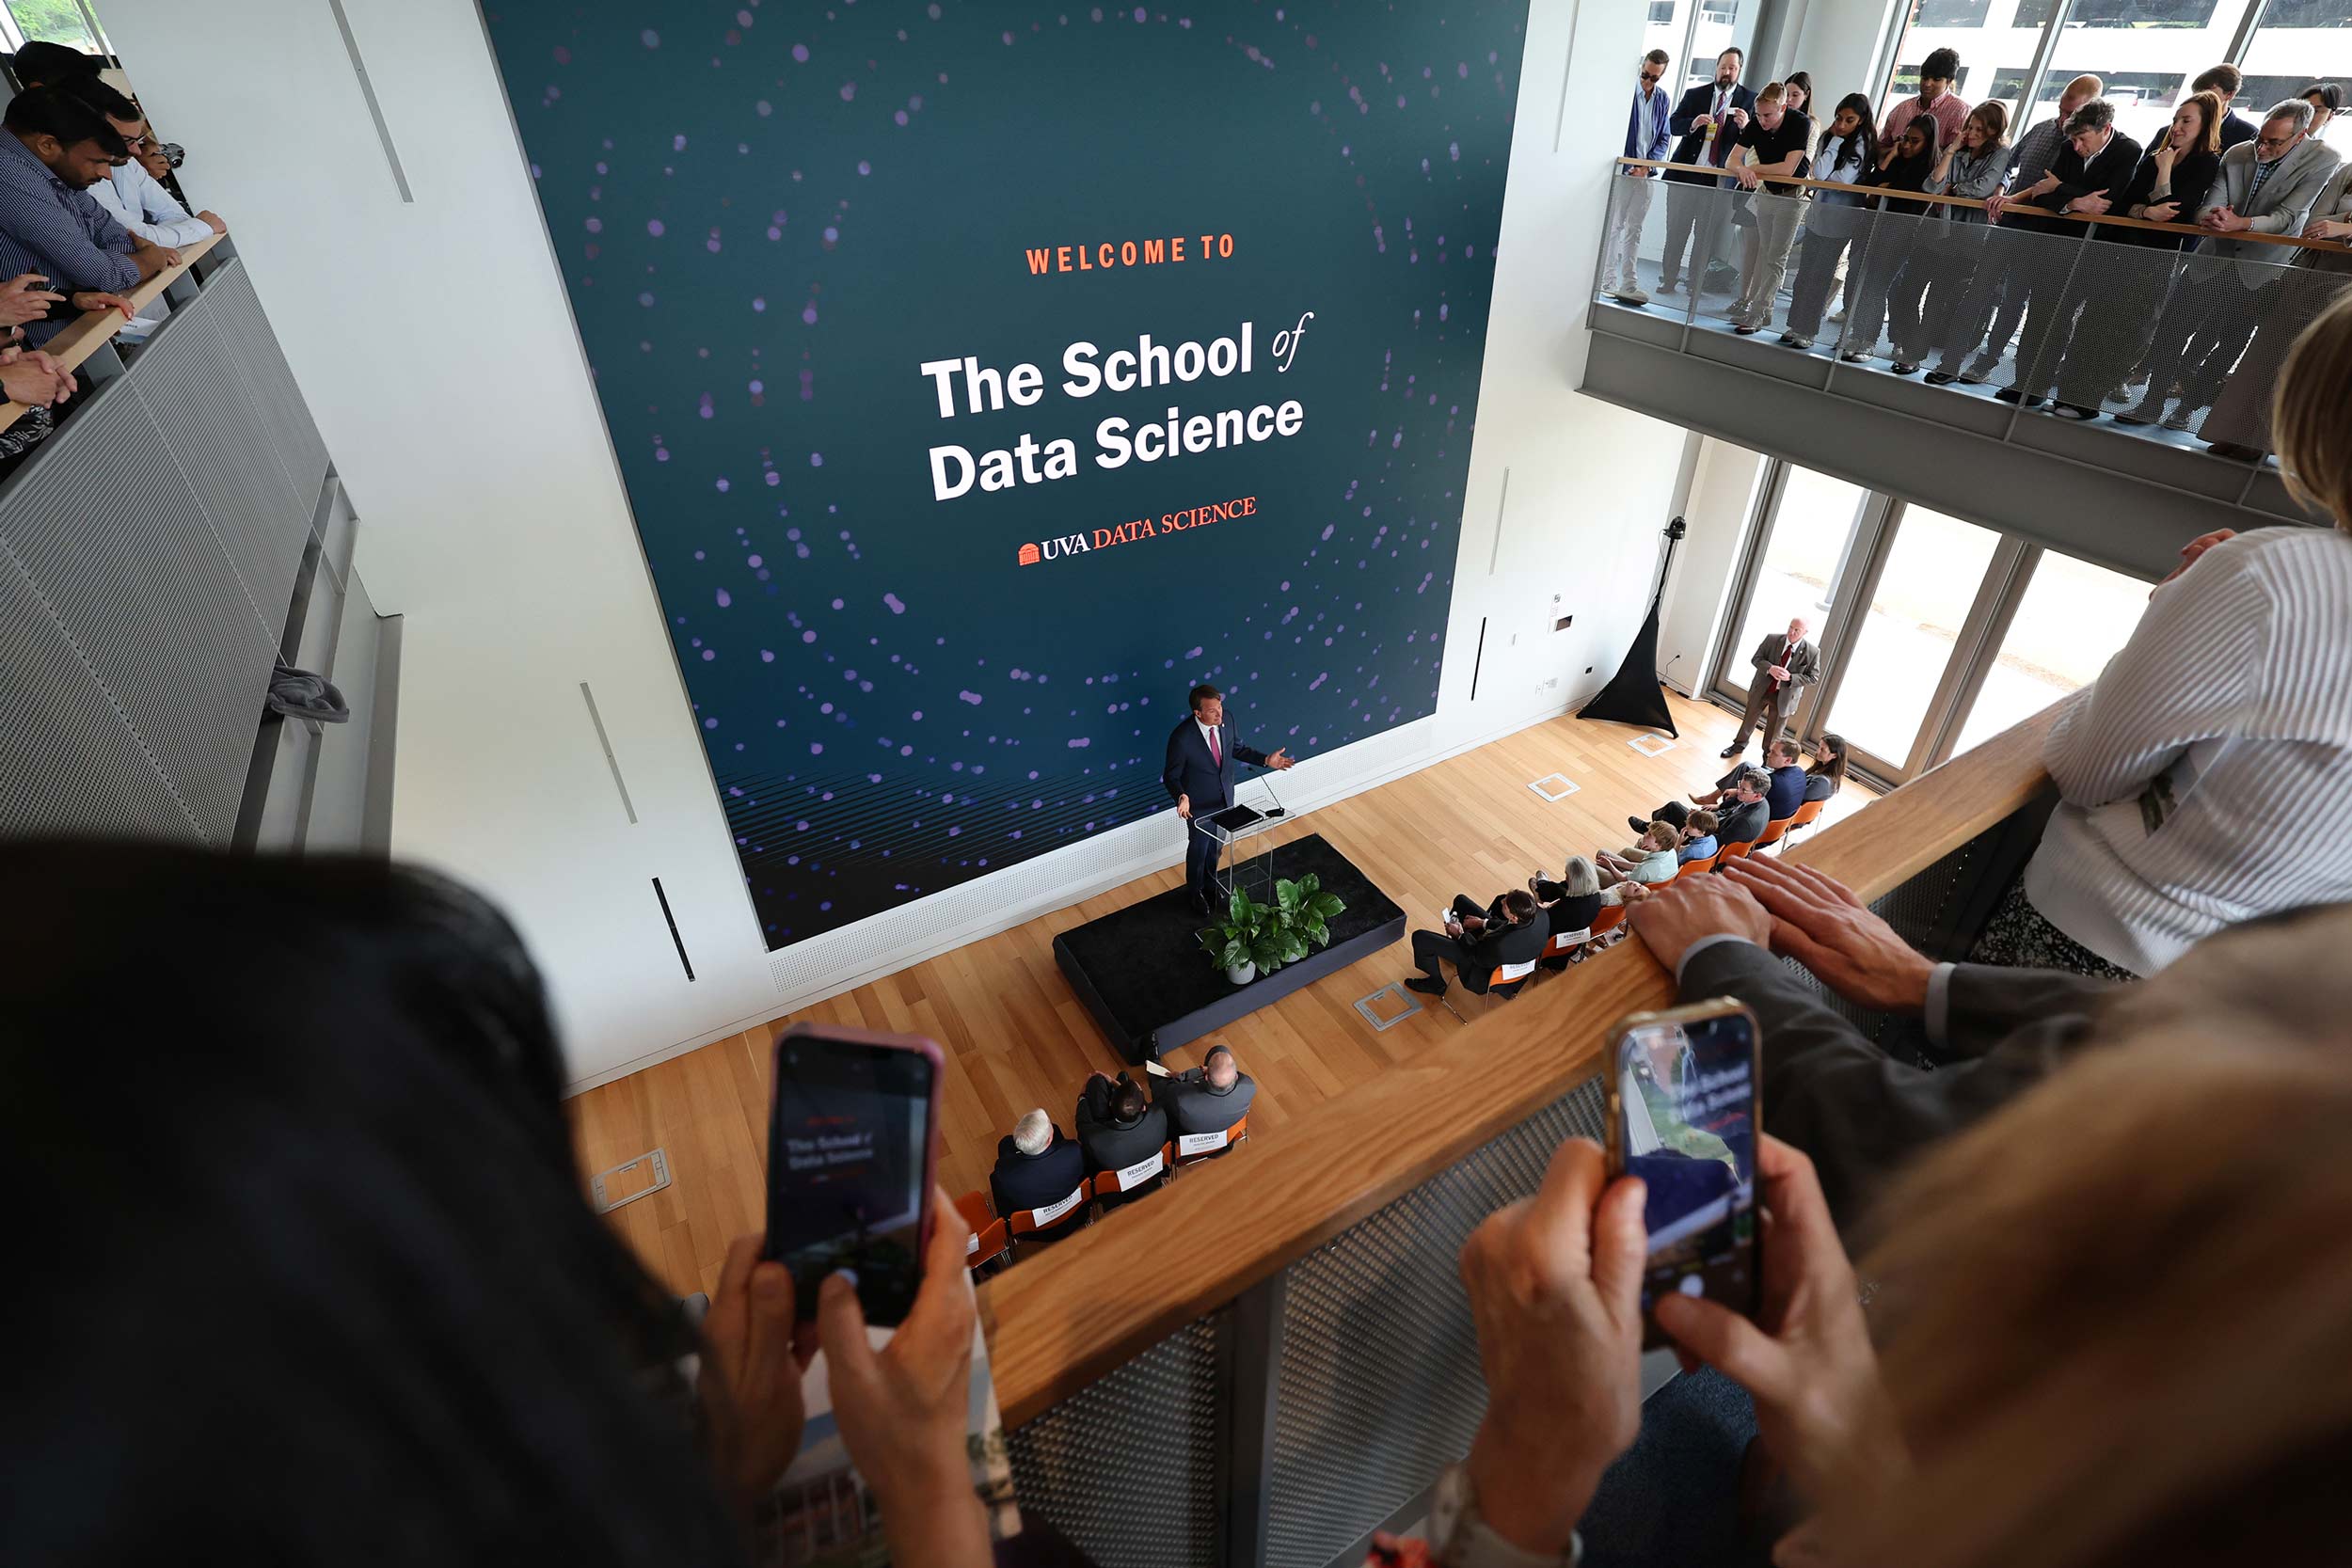 Grand Opening of UVA’s School of Data Science: Celebrating the Visionaries and Pioneers who Made it Possible